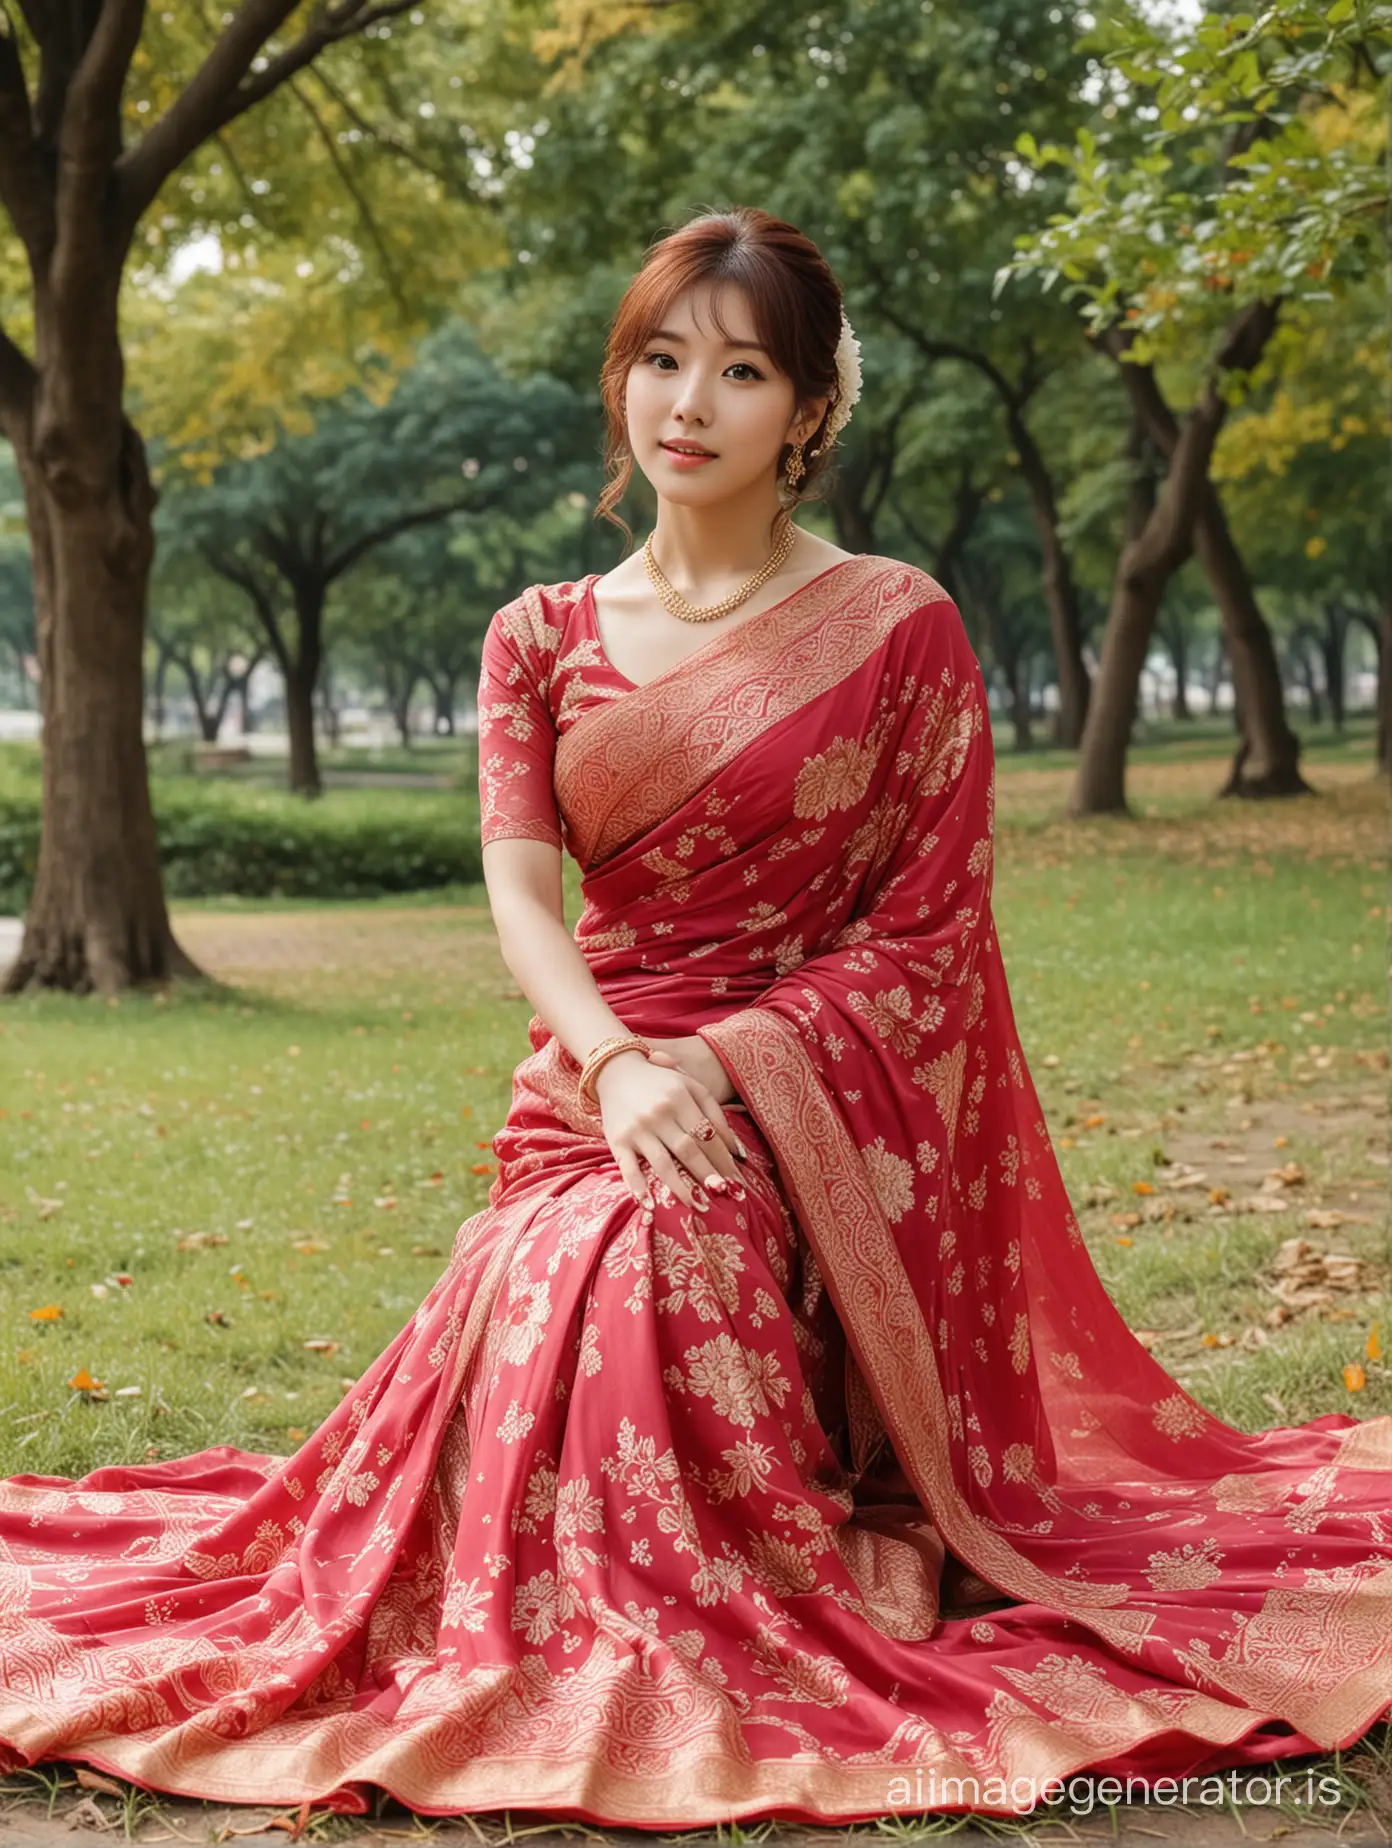 Extremely beautiful Jun Hyoseong wearing traditional Indian saree sitting on an empty park,